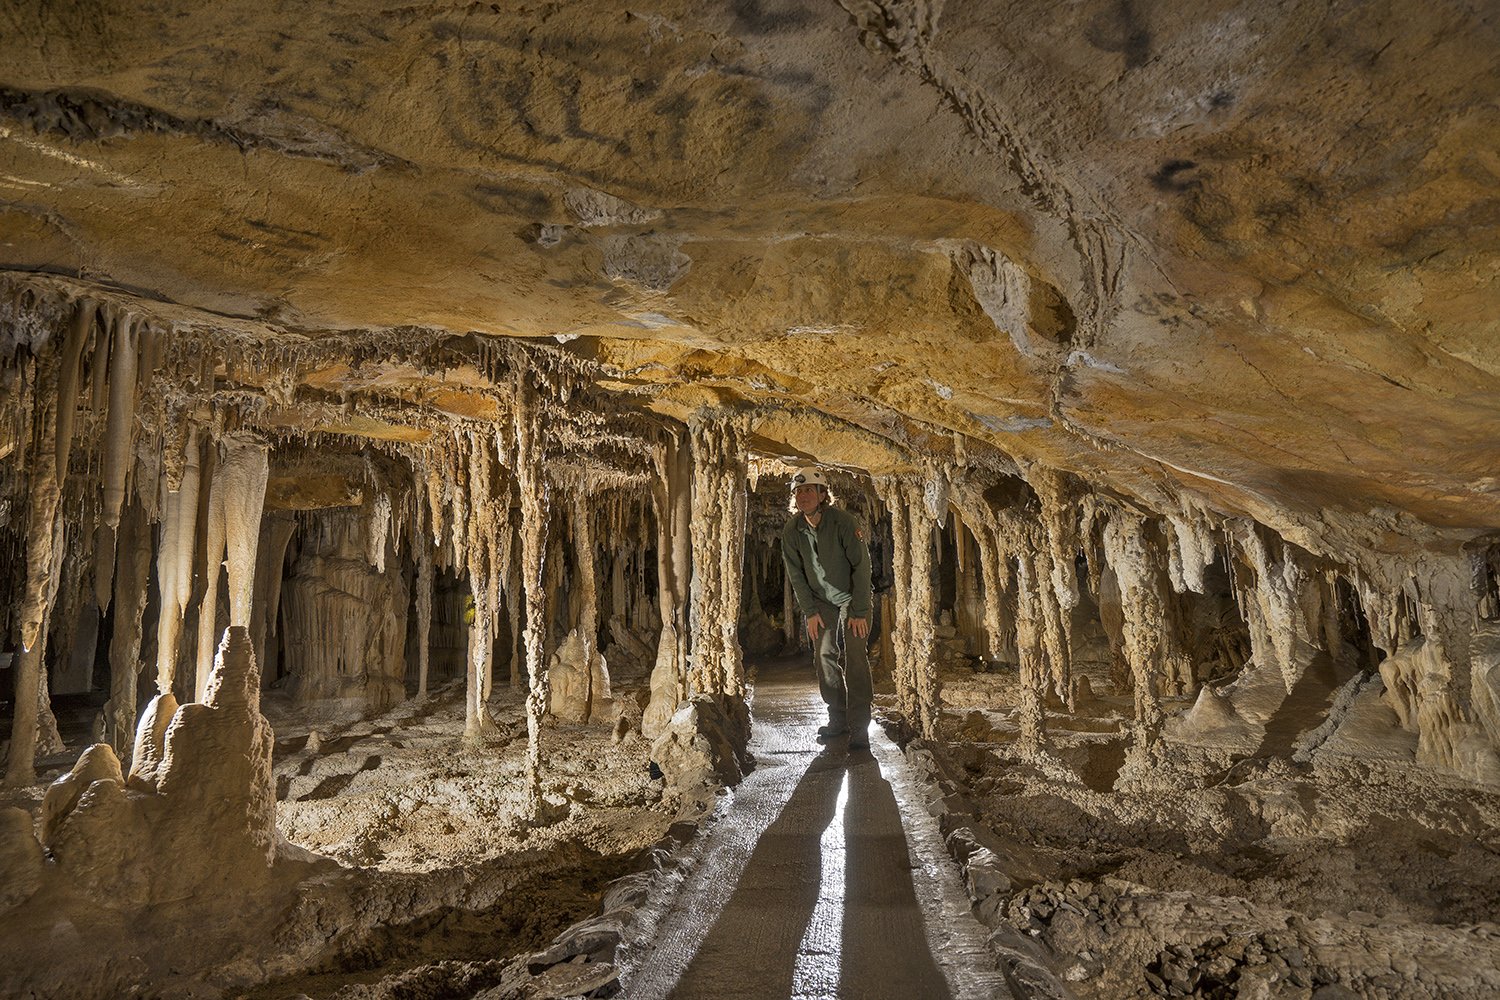 Lehman Caves is a popular attraction and features many interesting rock formations.